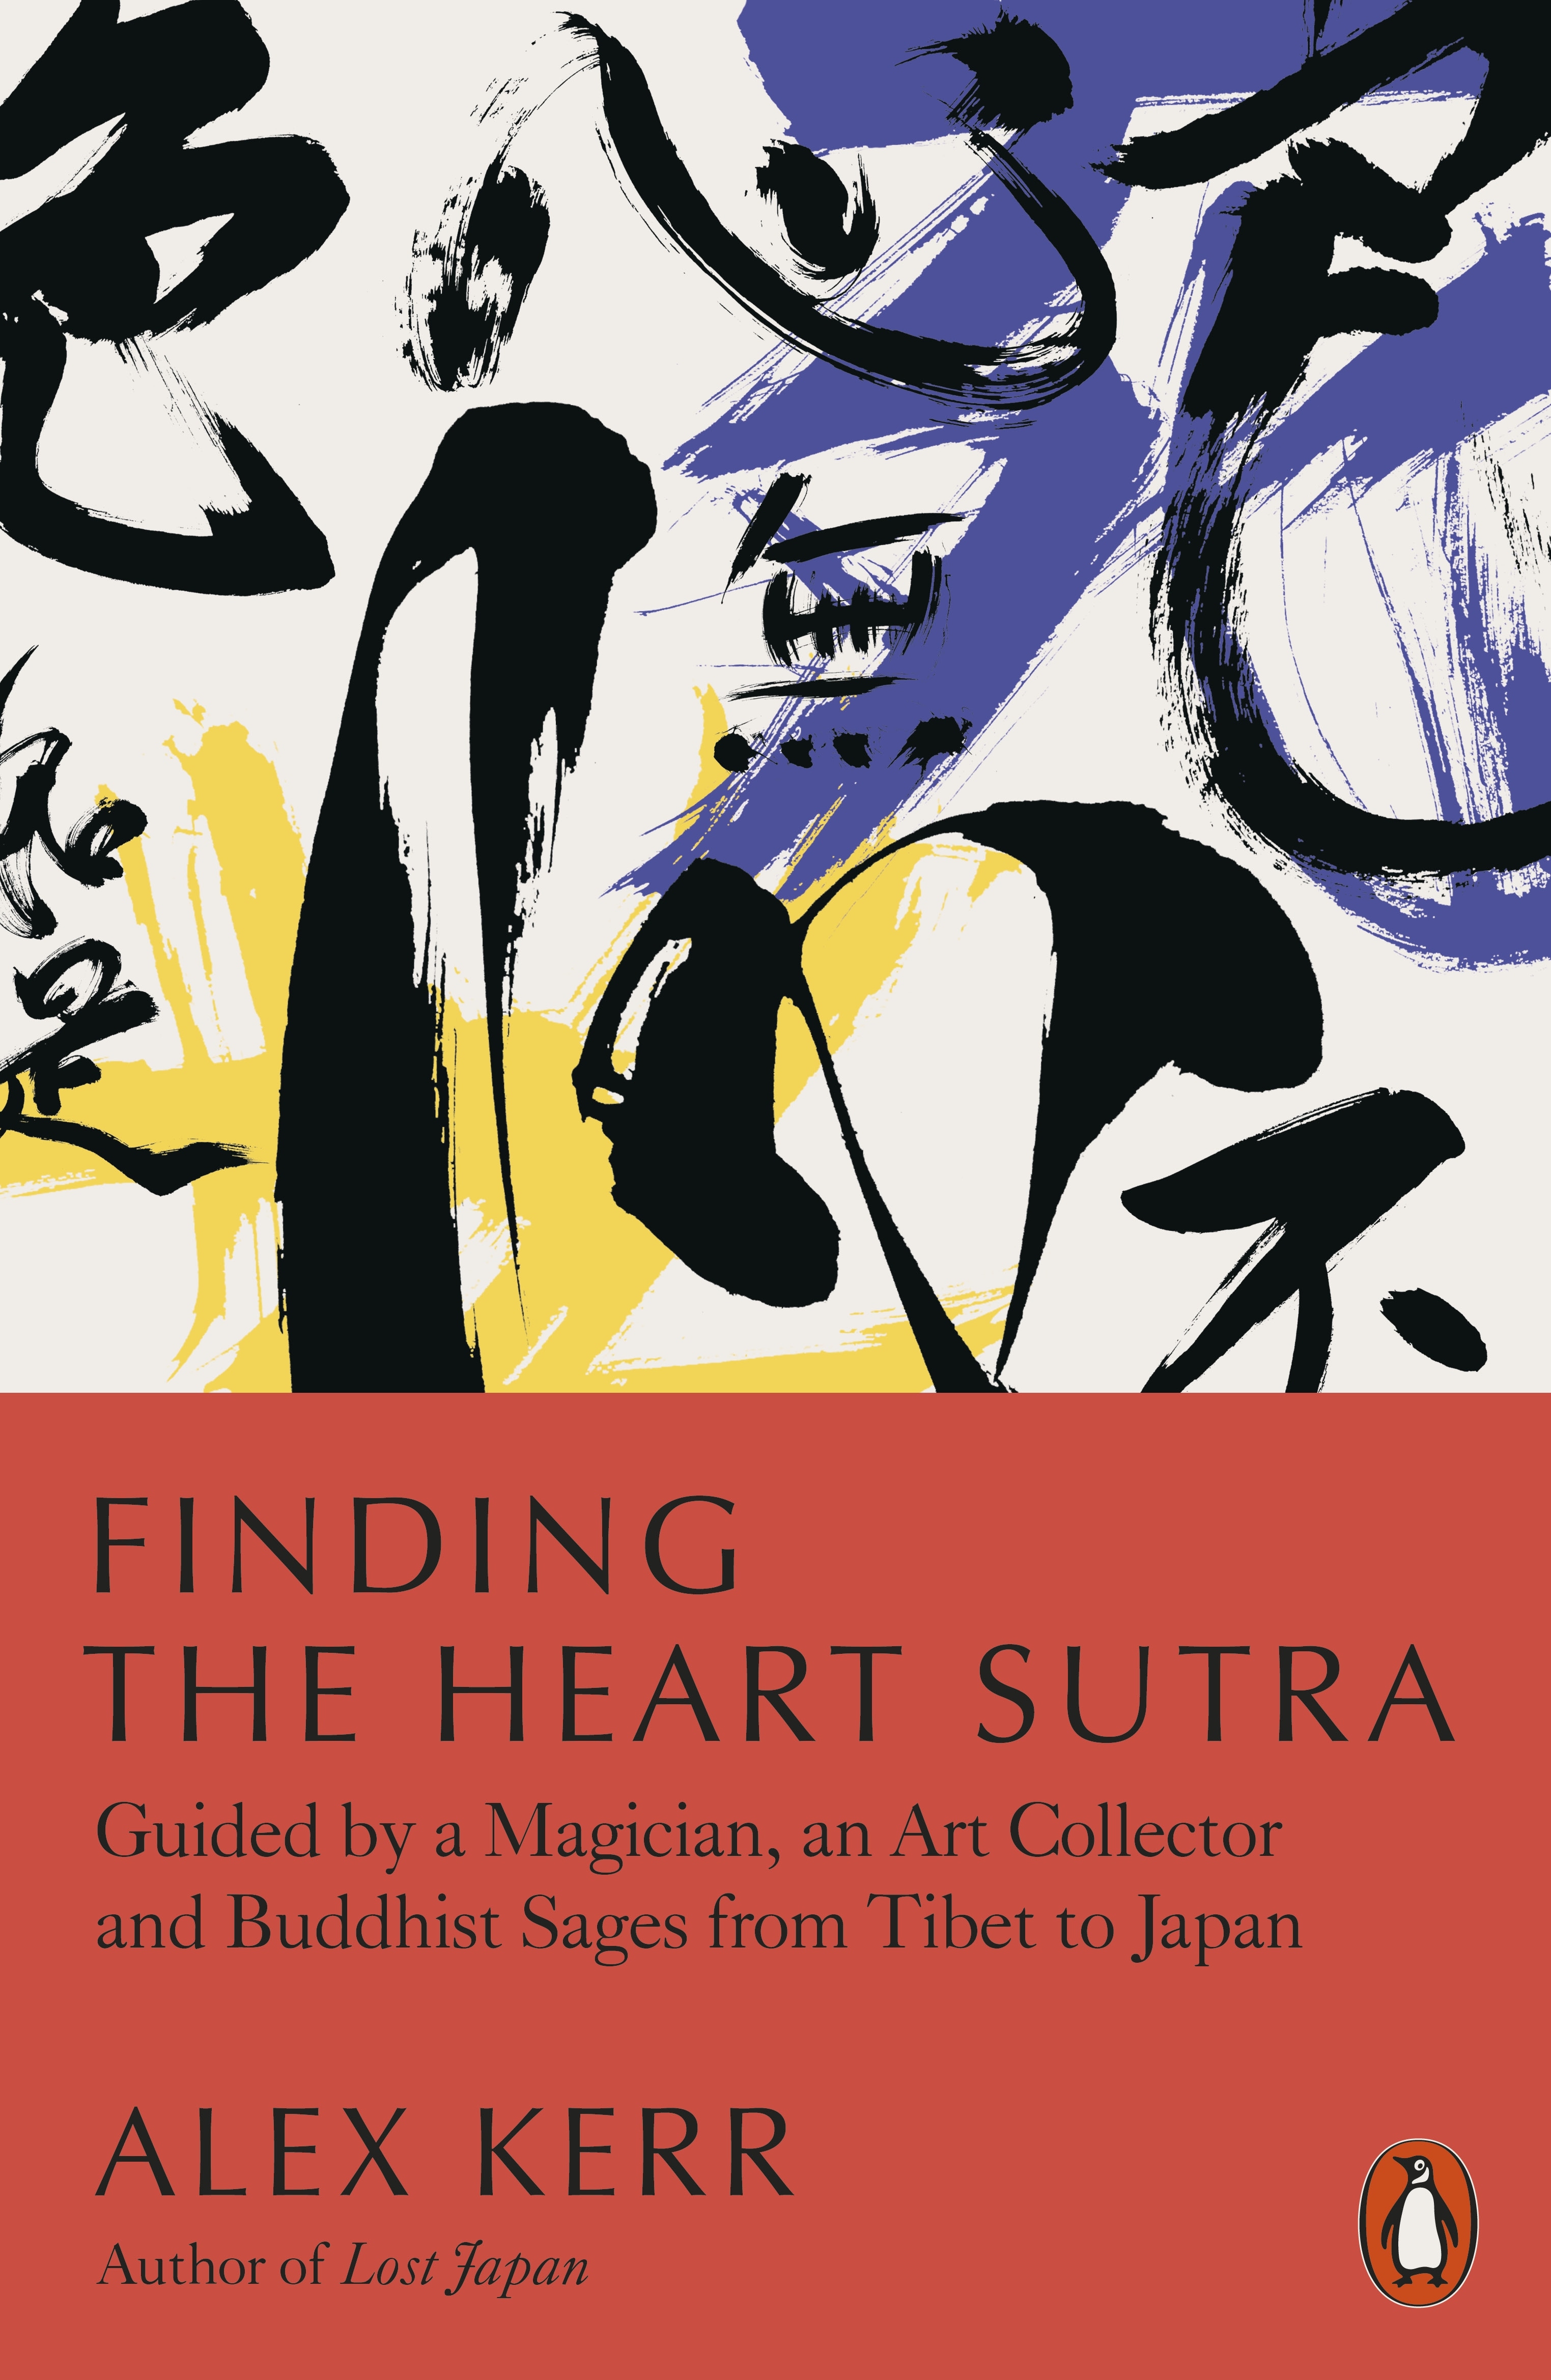 Book “Finding the Heart Sutra” by Alex Kerr — March 3, 2022